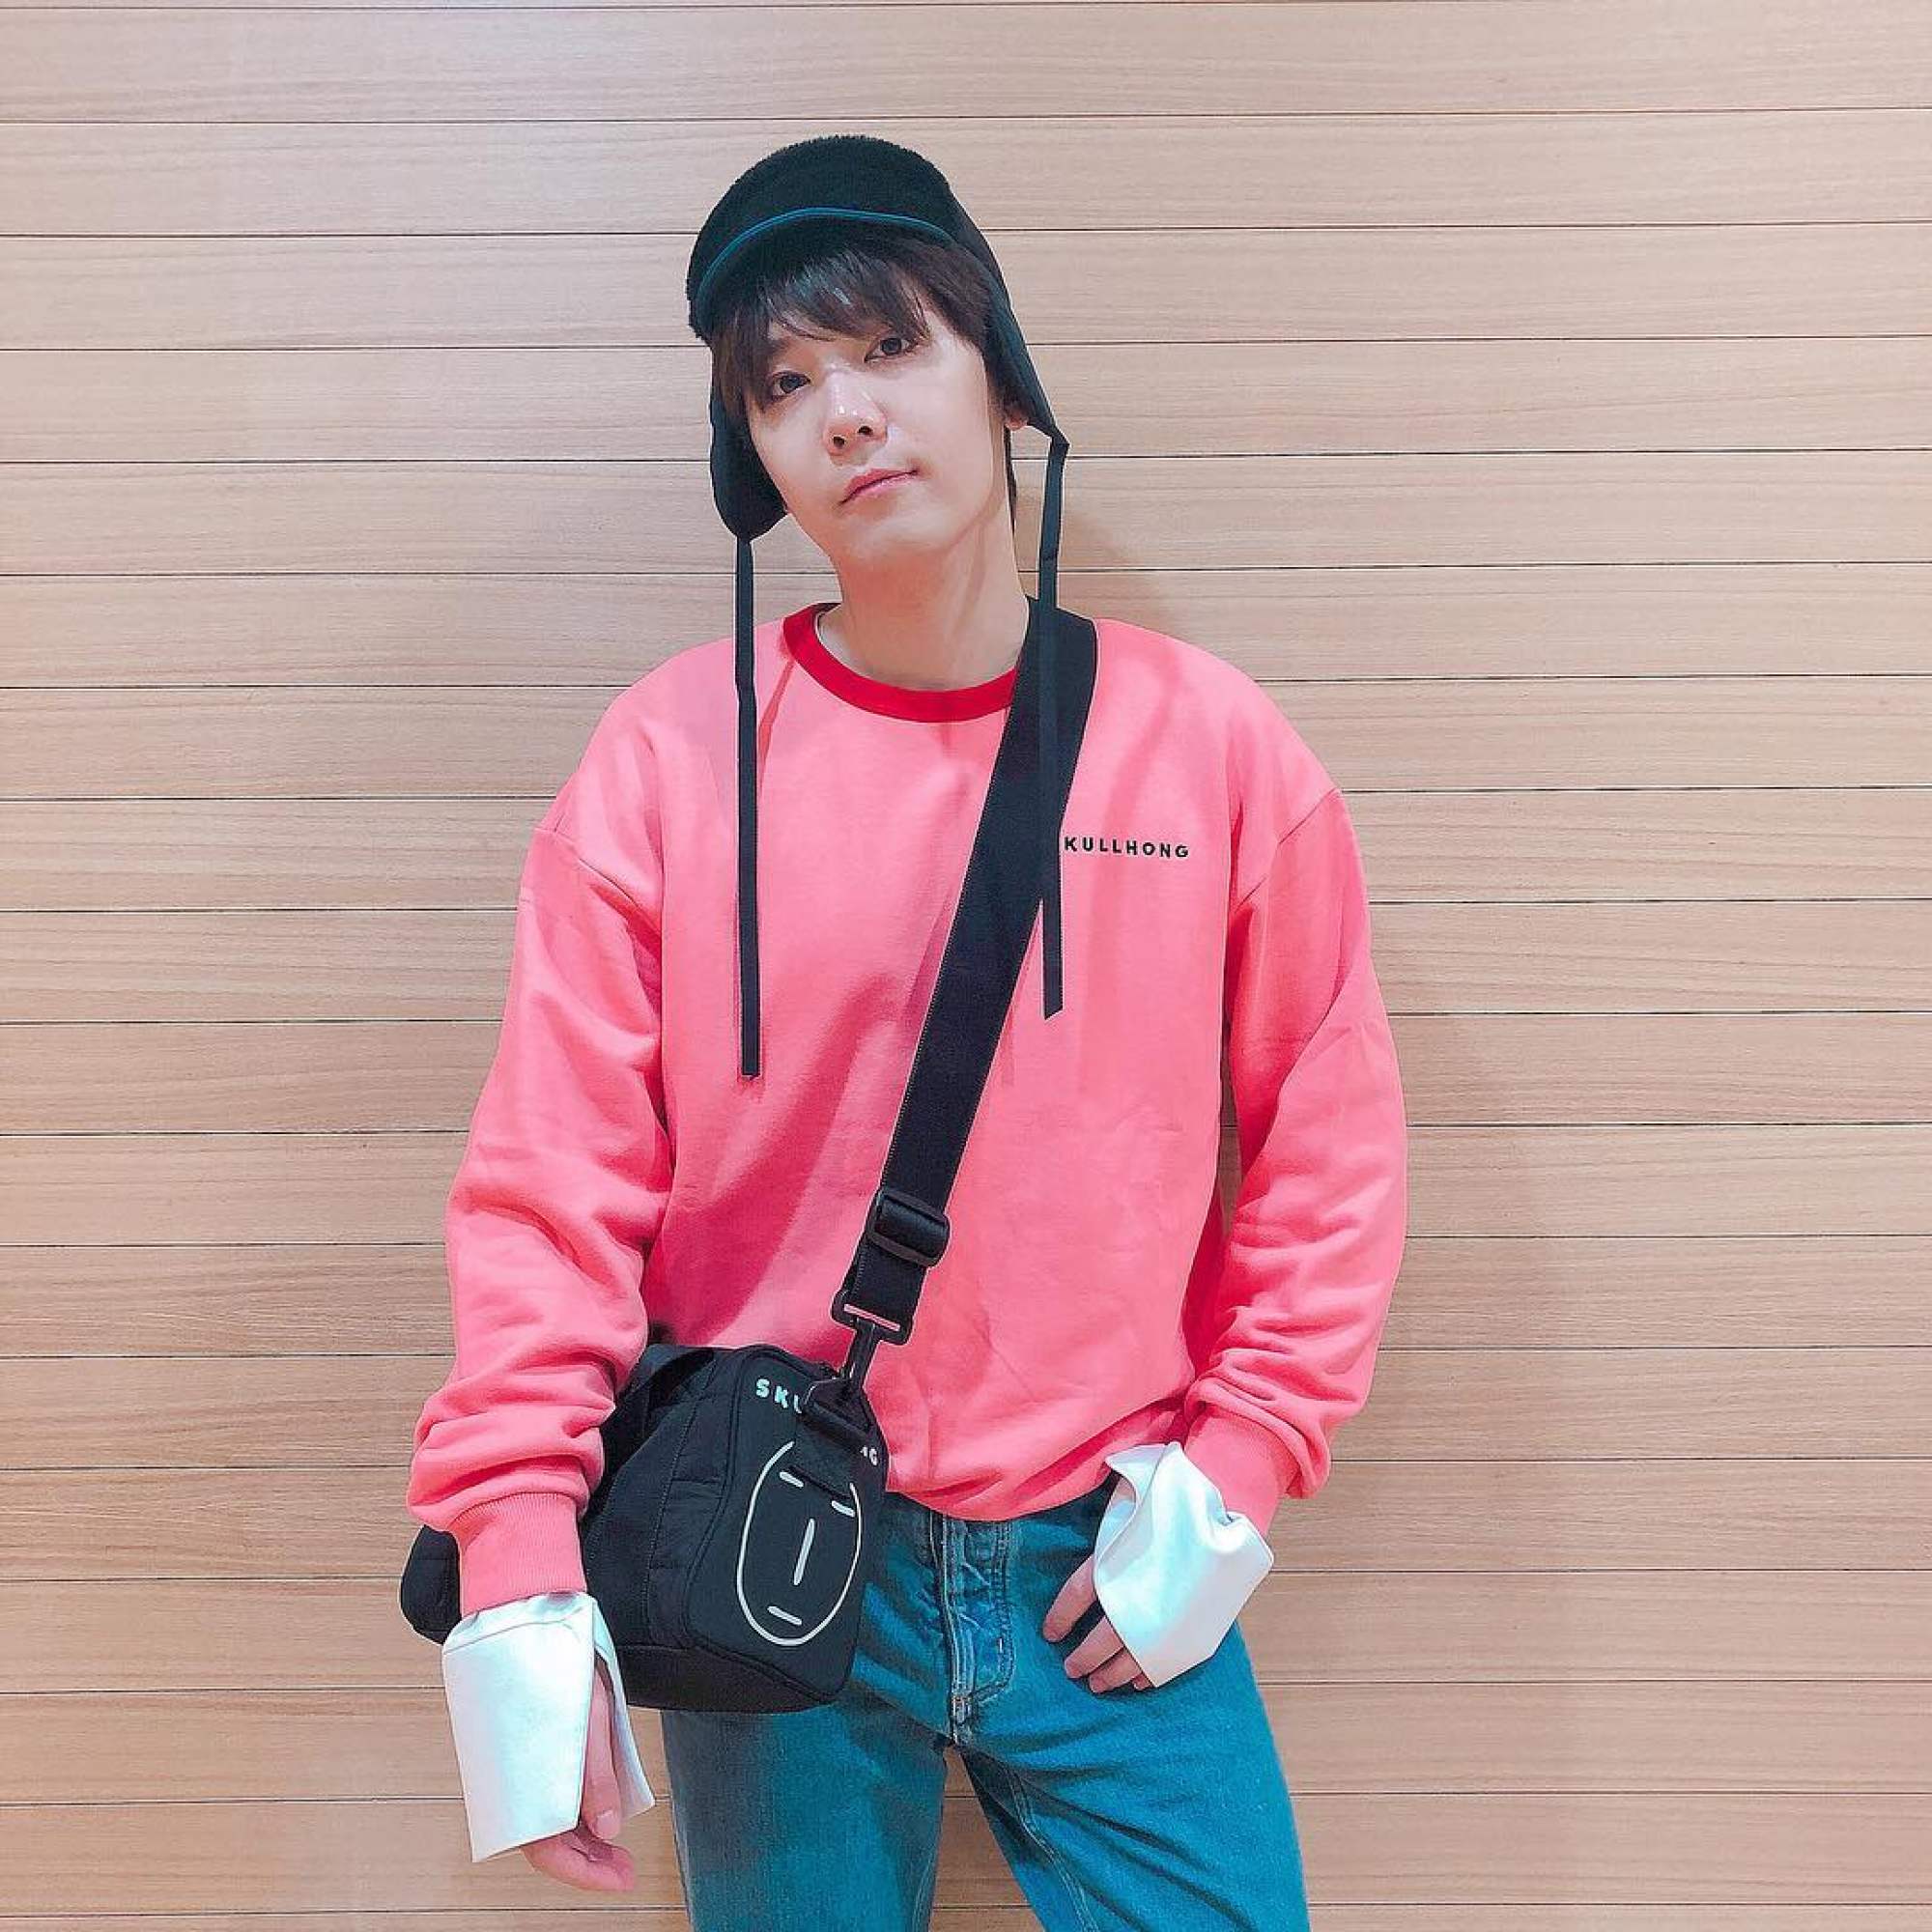 Lee Hong-gi has become a trendsetter in fashion for his unapologetic style. Photo: @skullhong_official/Instagram